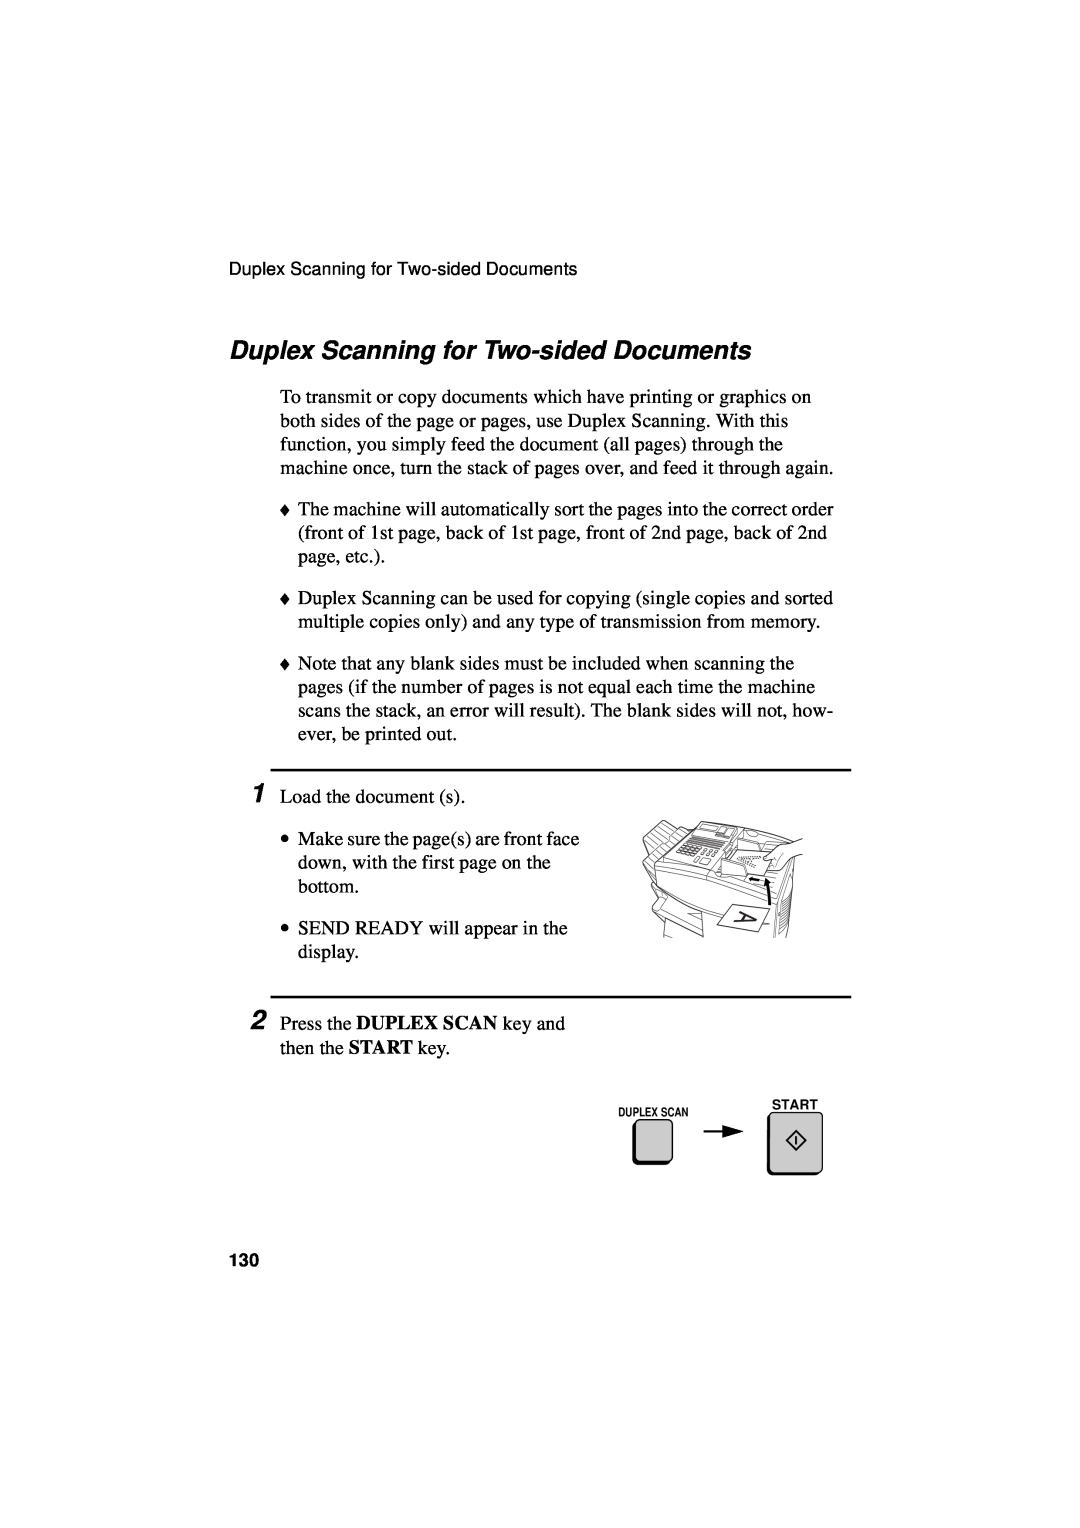 Sharp FO-5700, FO-4700, FO-5550 operation manual Duplex Scanning for Two-sided Documents 